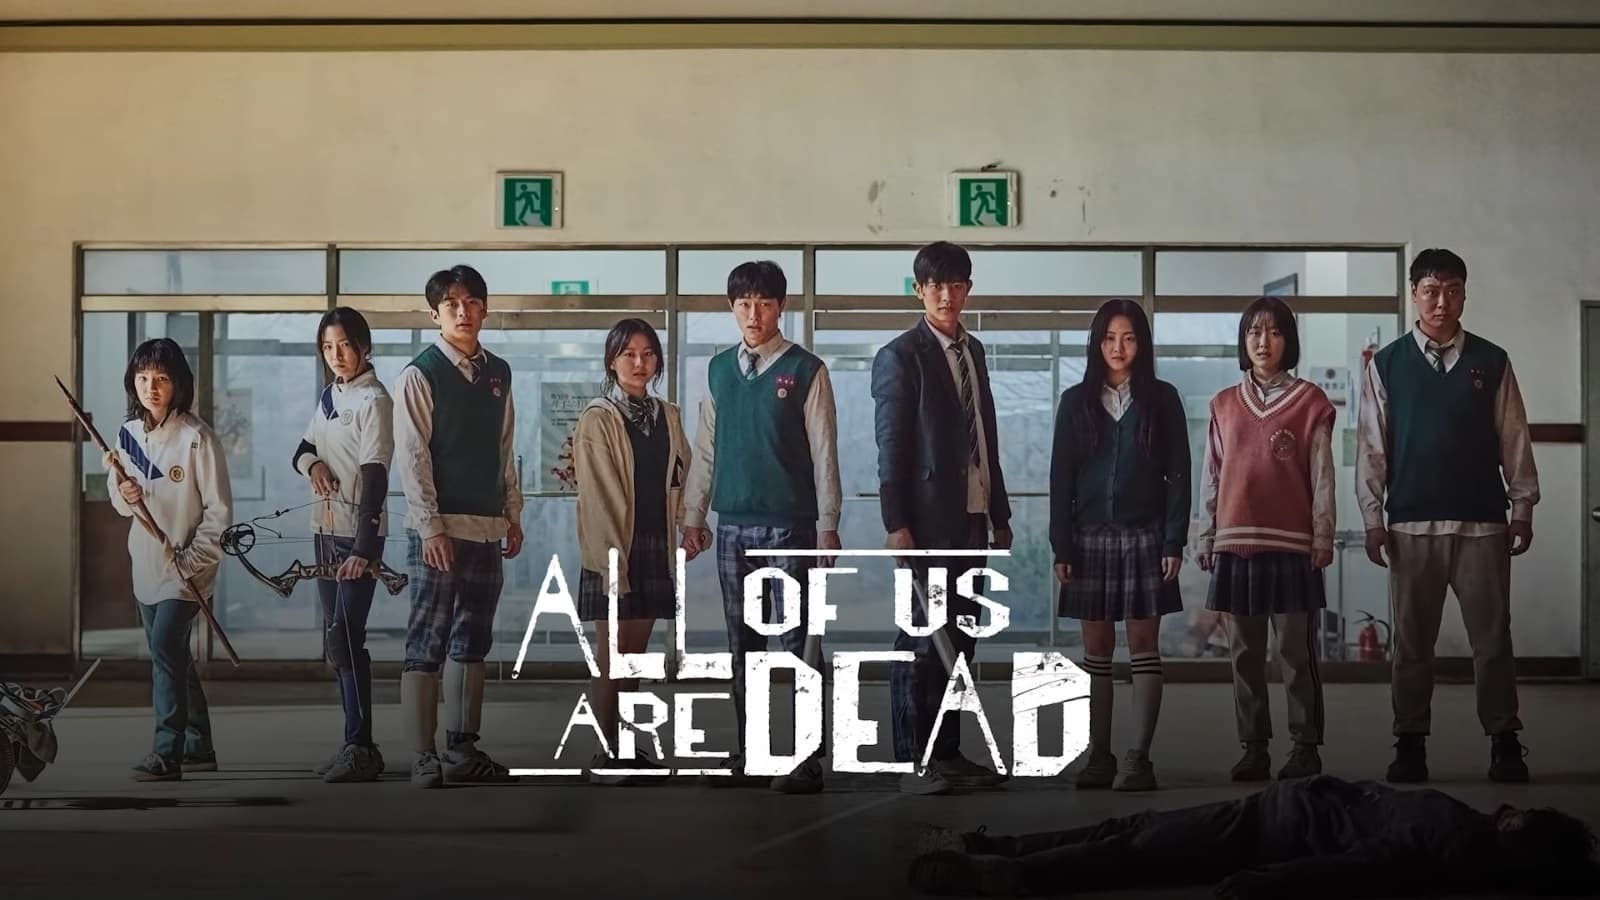 Everything You Need To Know About All Of Us Are Dead Season 2